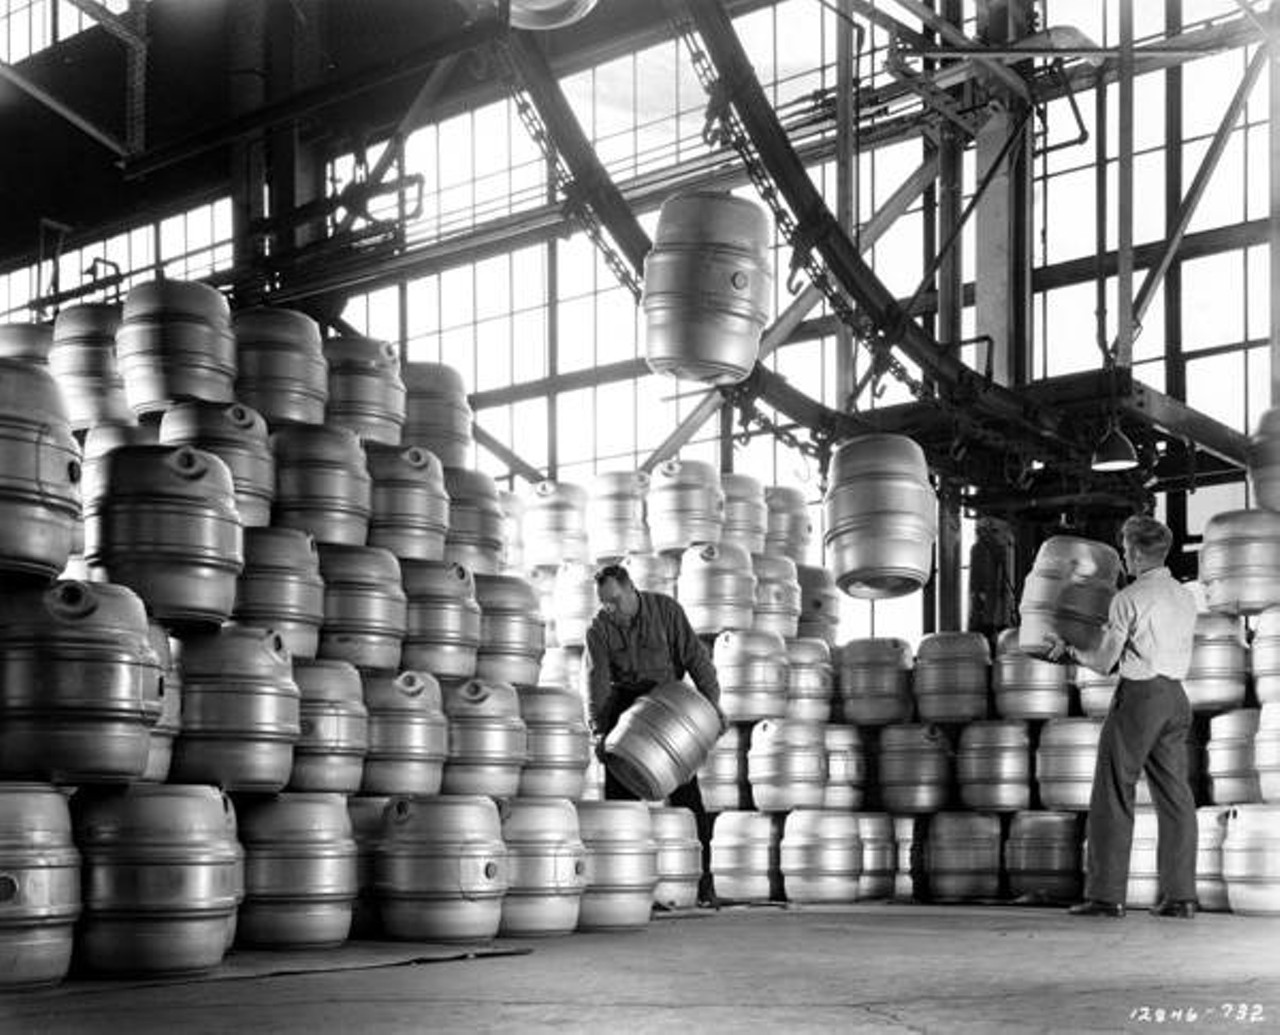 Stainless Steel Containers Stacked at Firestone Steel Products, 1960